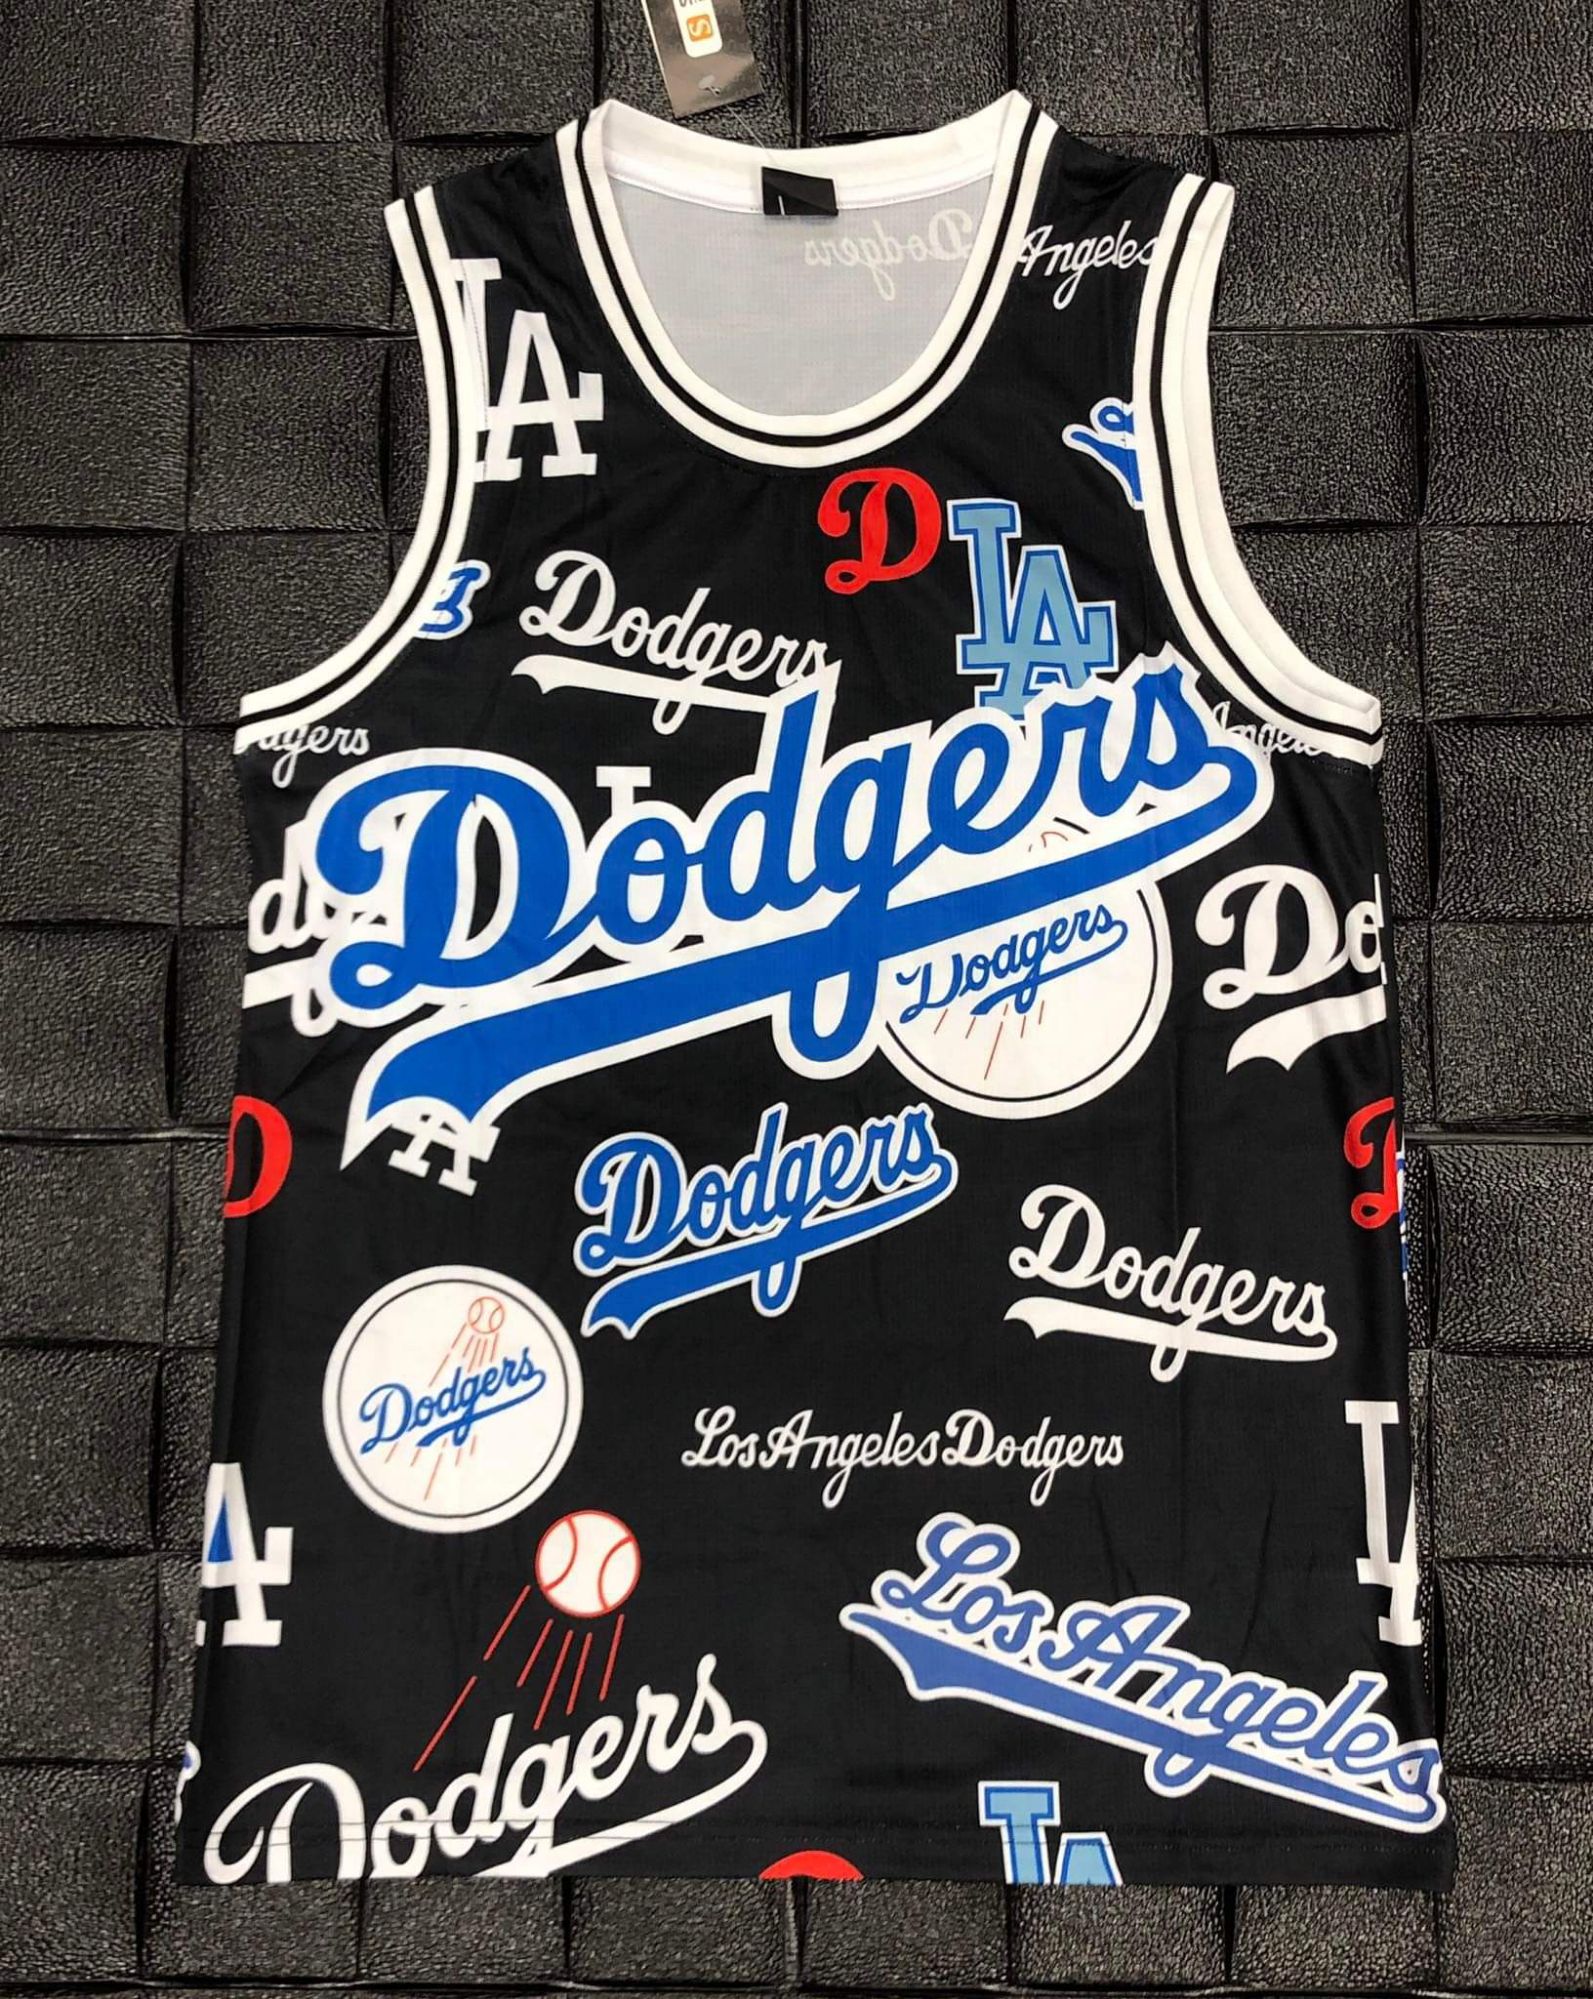 New Arrival Jersey Sando Dodgers High Quality Full Sublimation